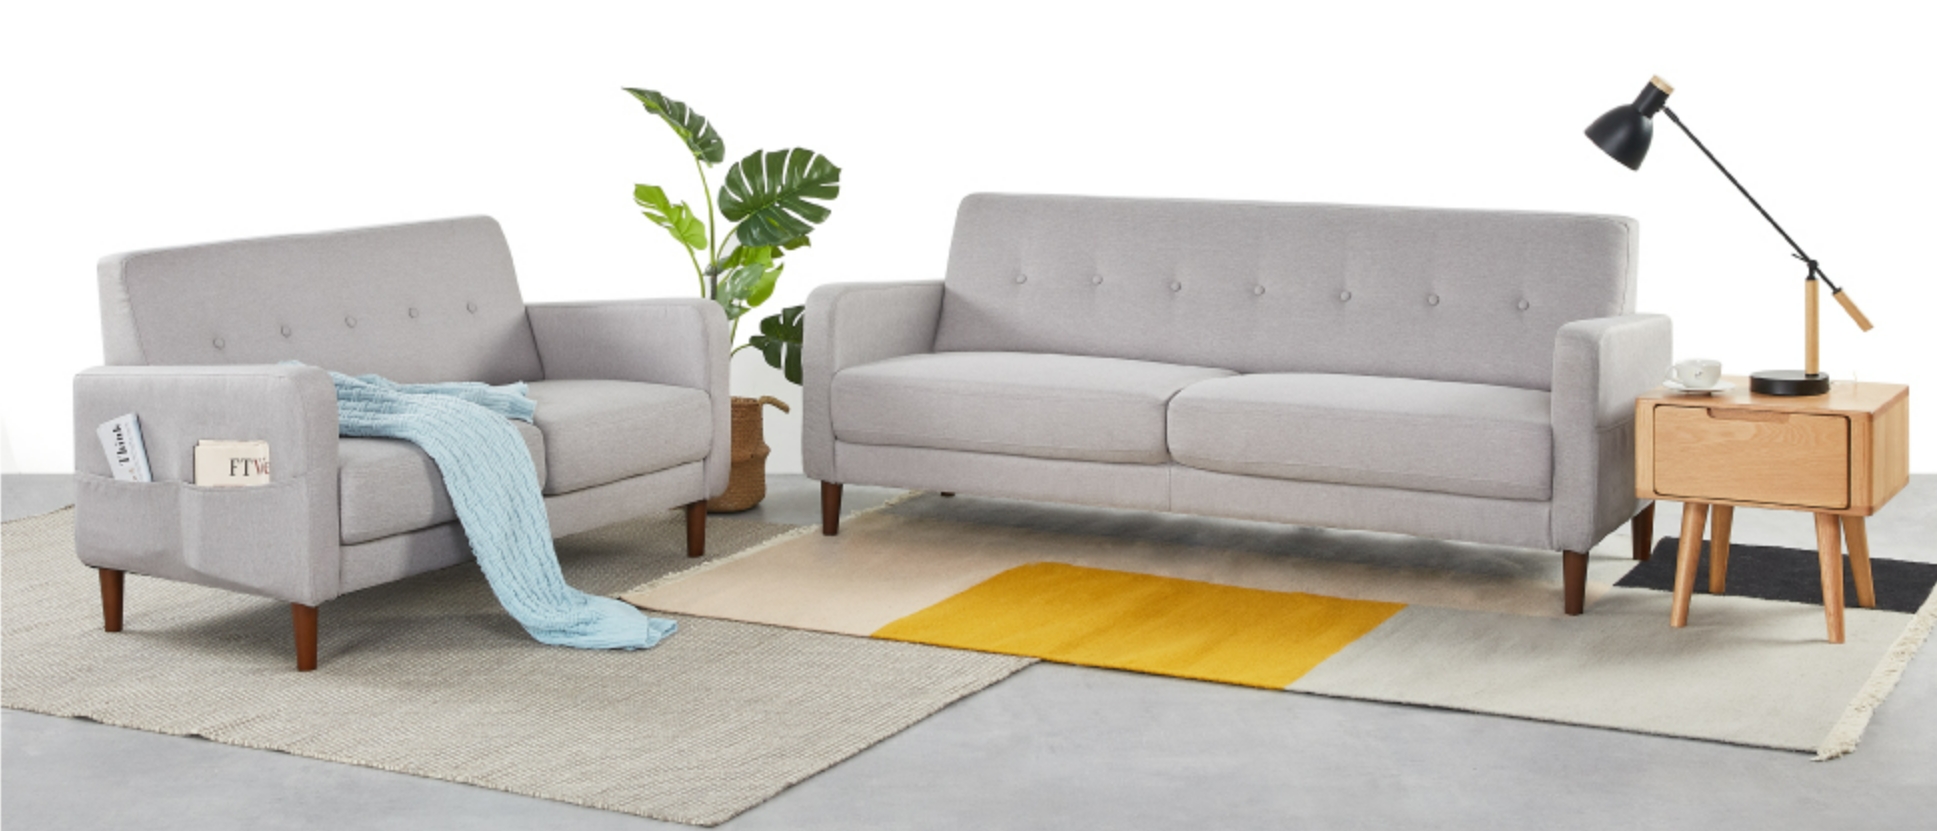 Mellow Adair Mid-Century Modern Loveseat/Sofa/Couch with Armrest Pockets, Tufted Linen Fabric, Light Grey